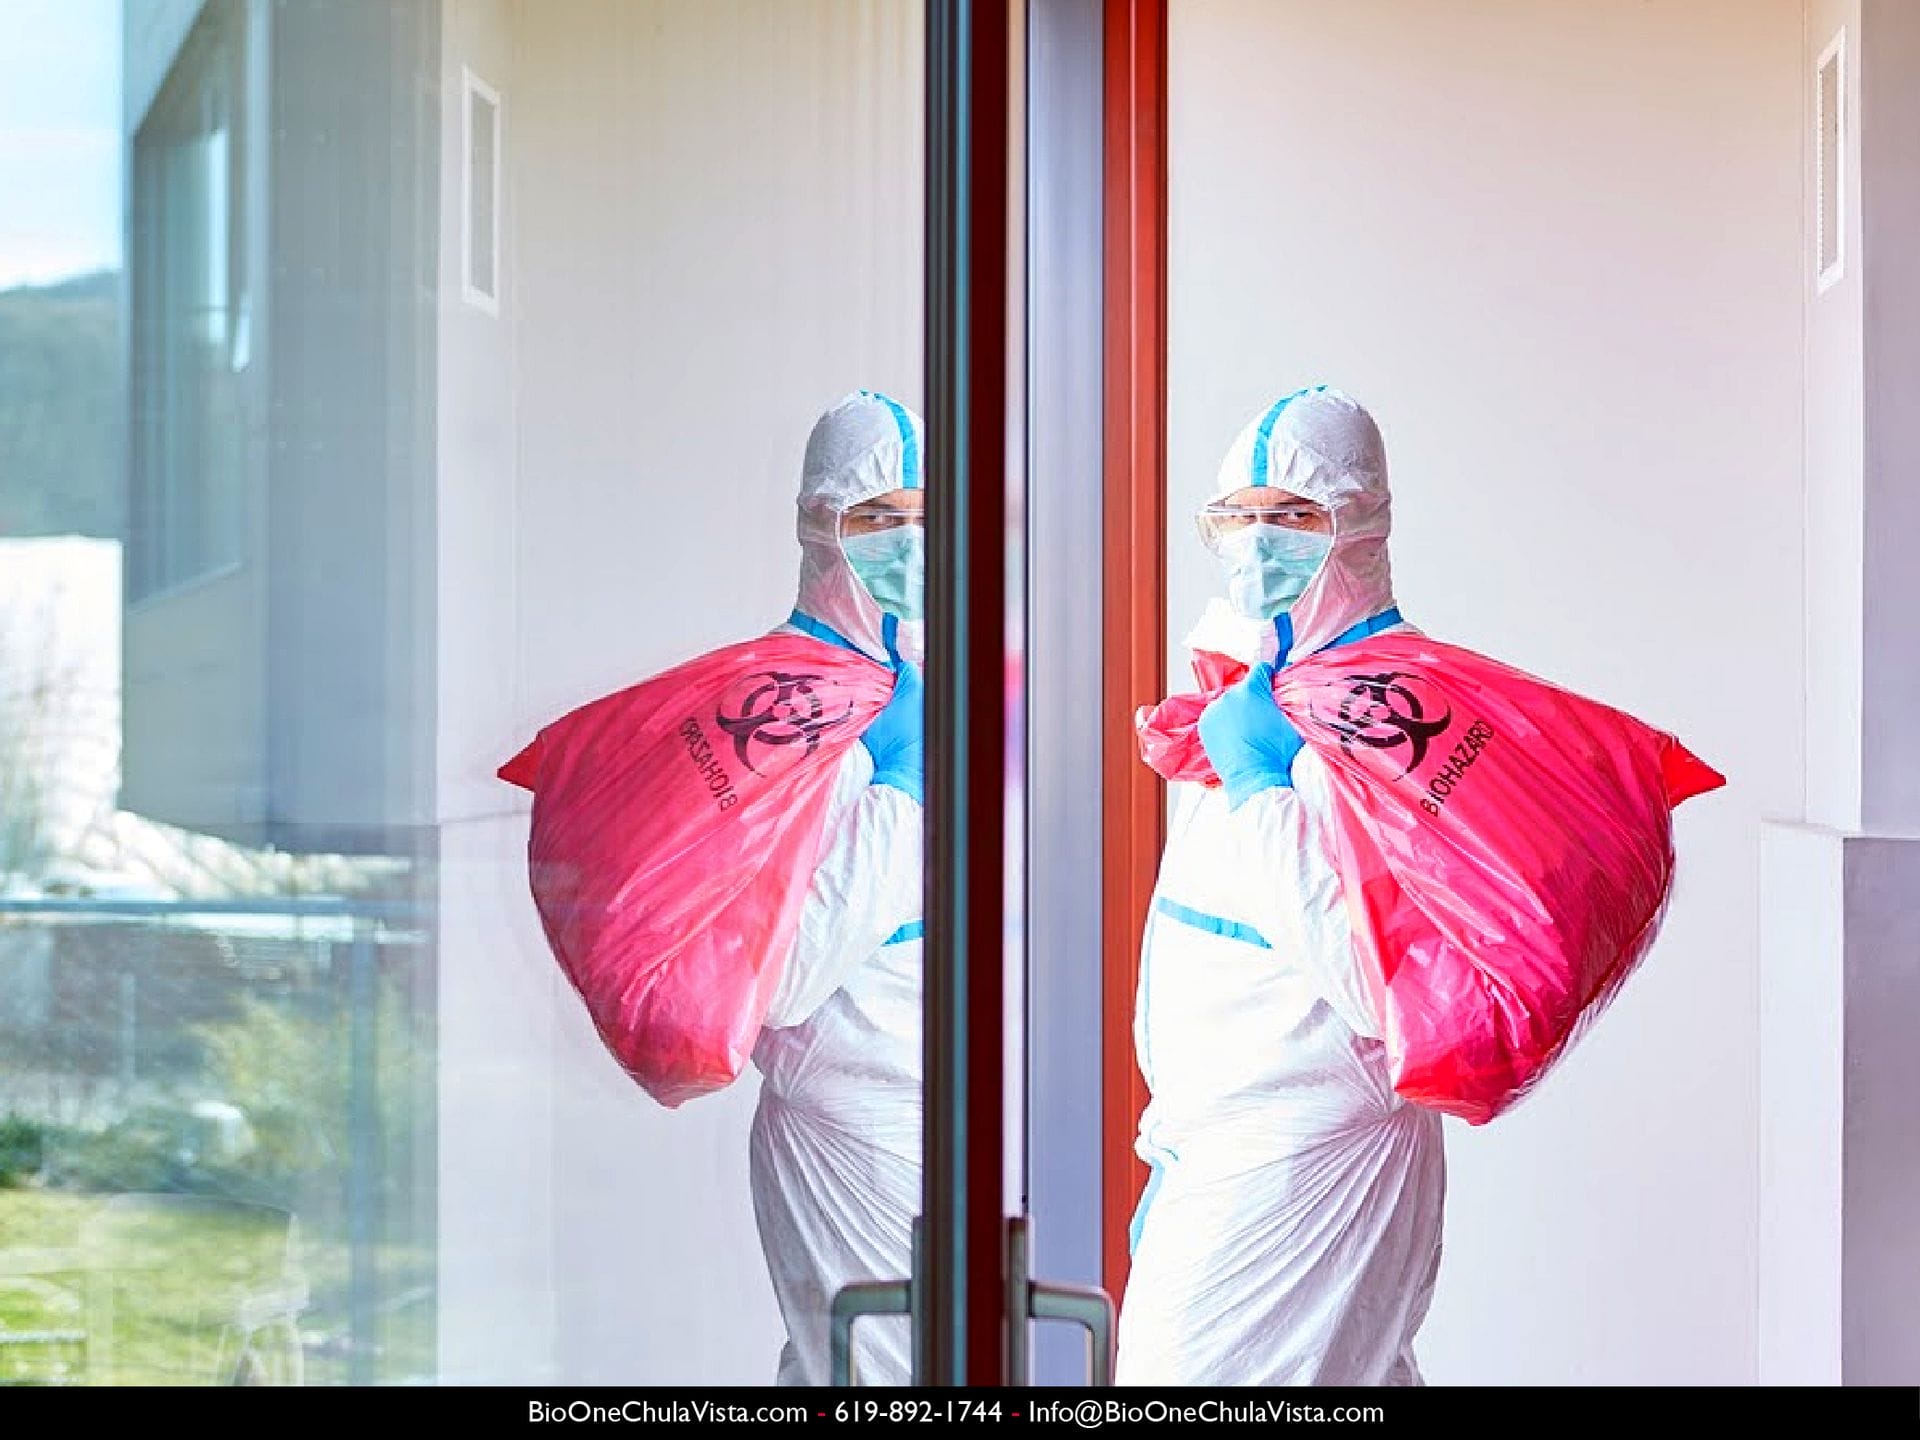 Image shows technician dressed with hazmat and PPE, as he takes out a red bag of biohazardous waste.